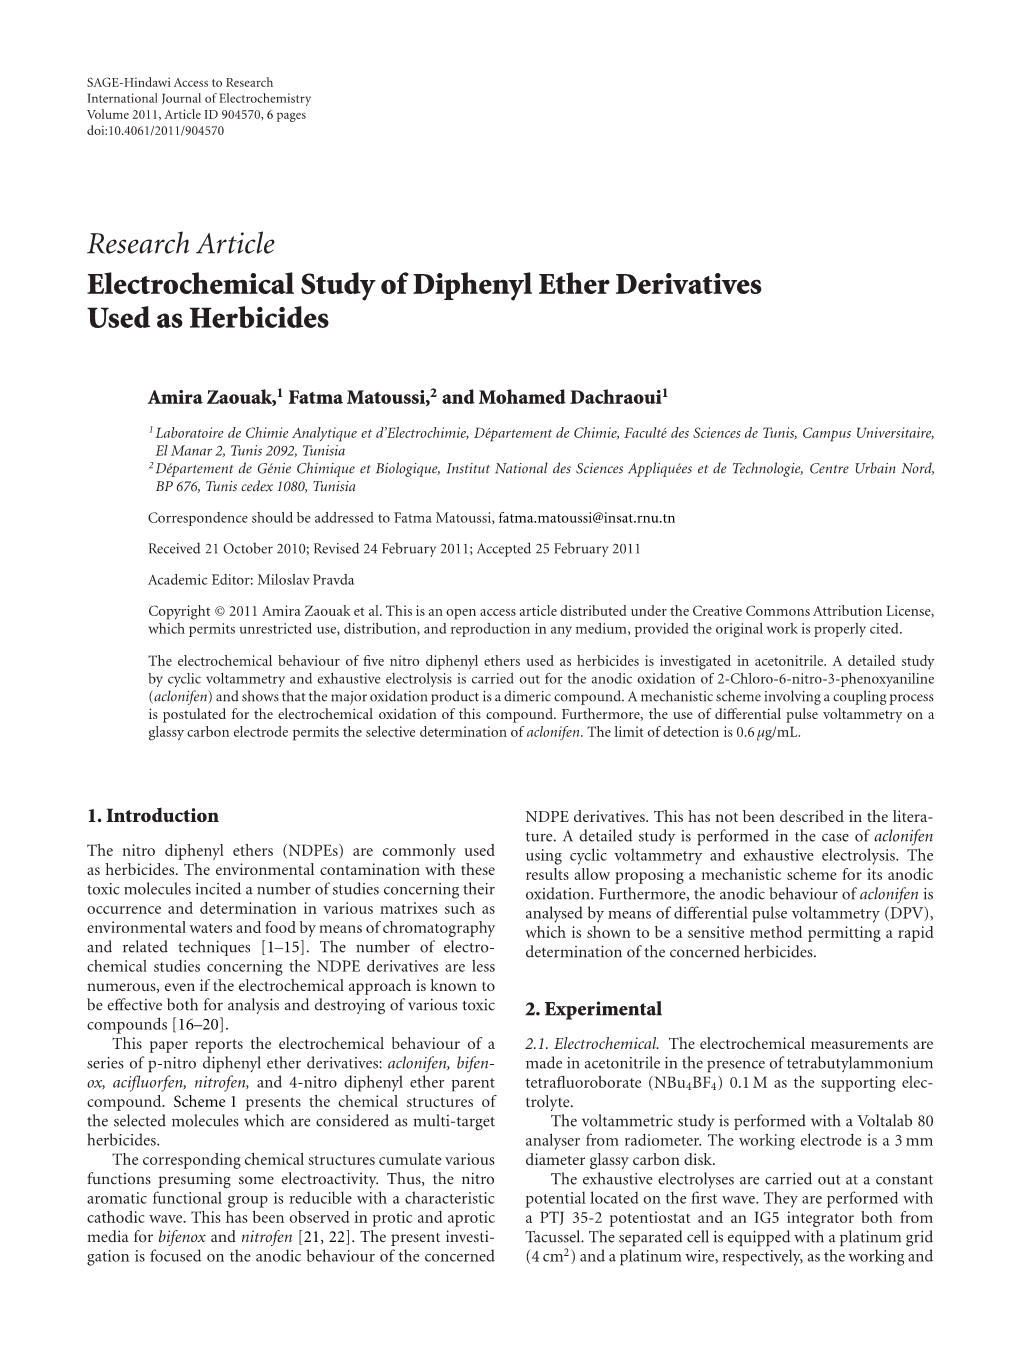 Electrochemical Study of Diphenyl Ether Derivatives Used As Herbicides